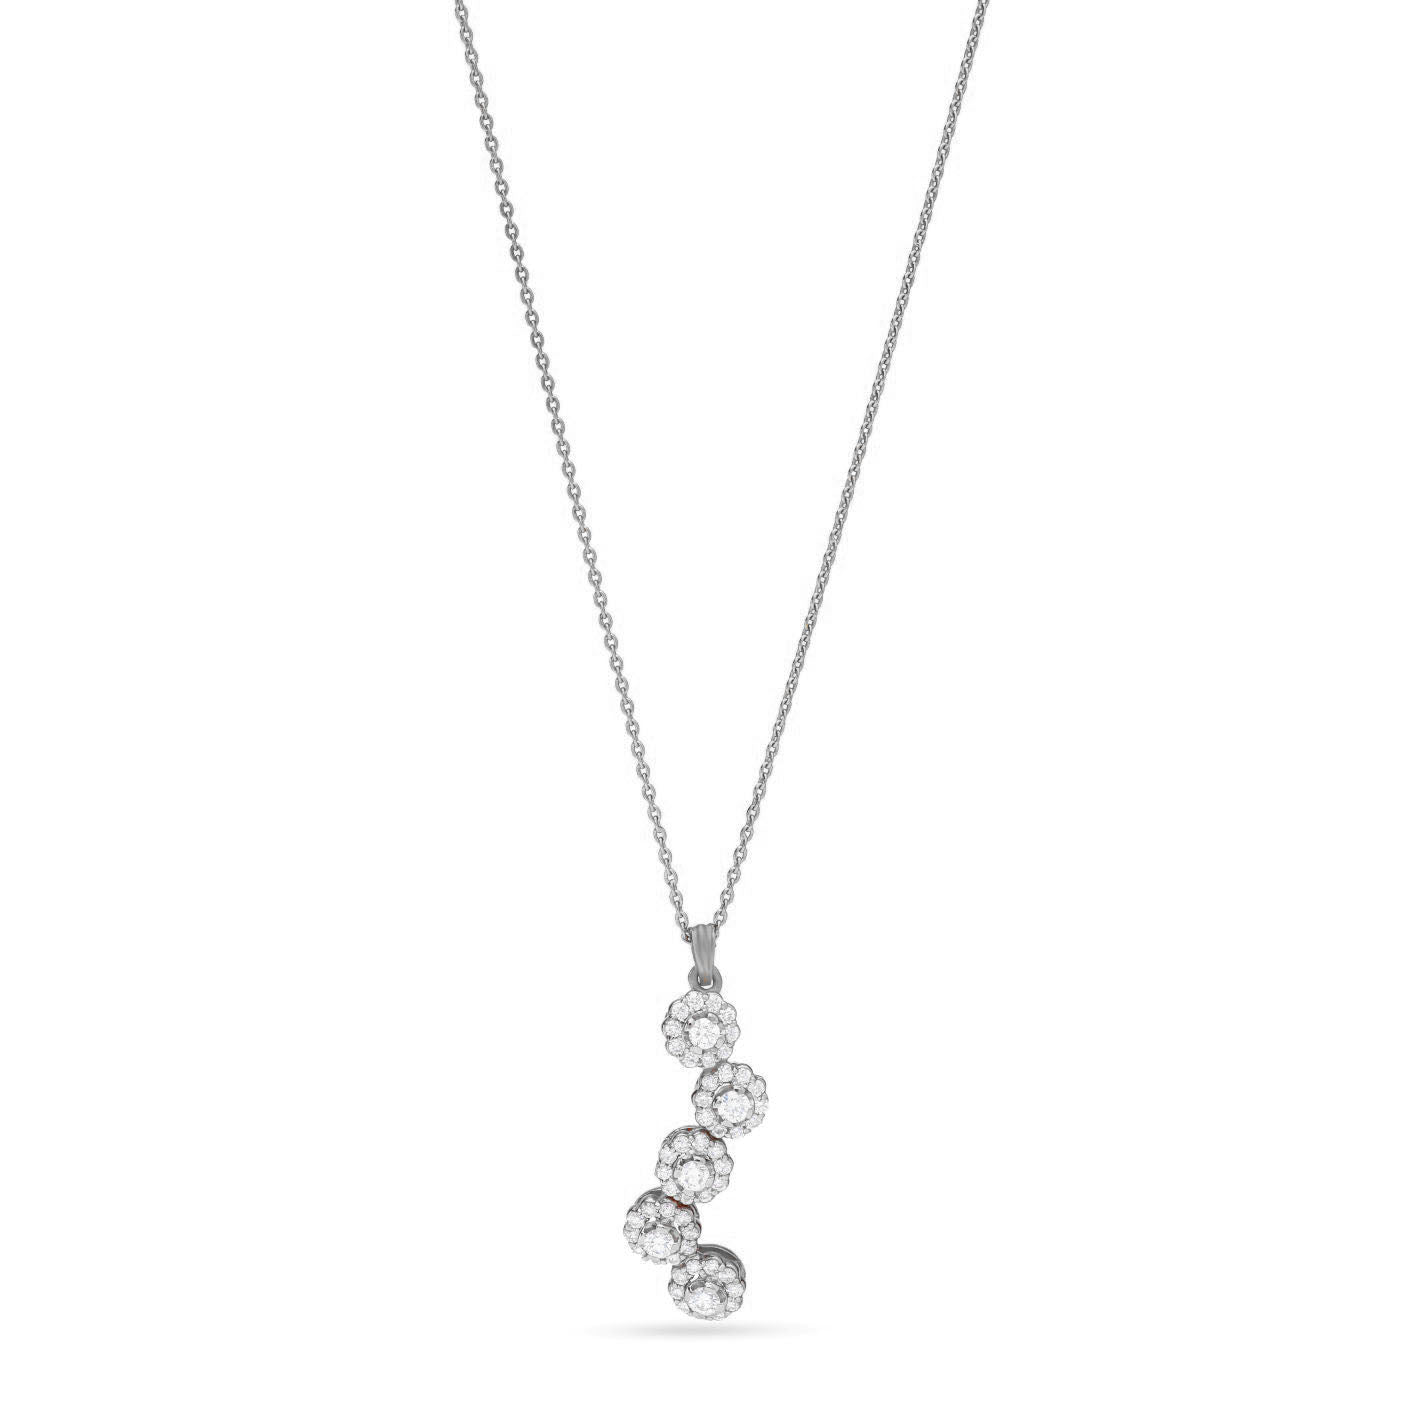 5 Diamond Flowers Pendant Necklace in White gold 18K - SIR653